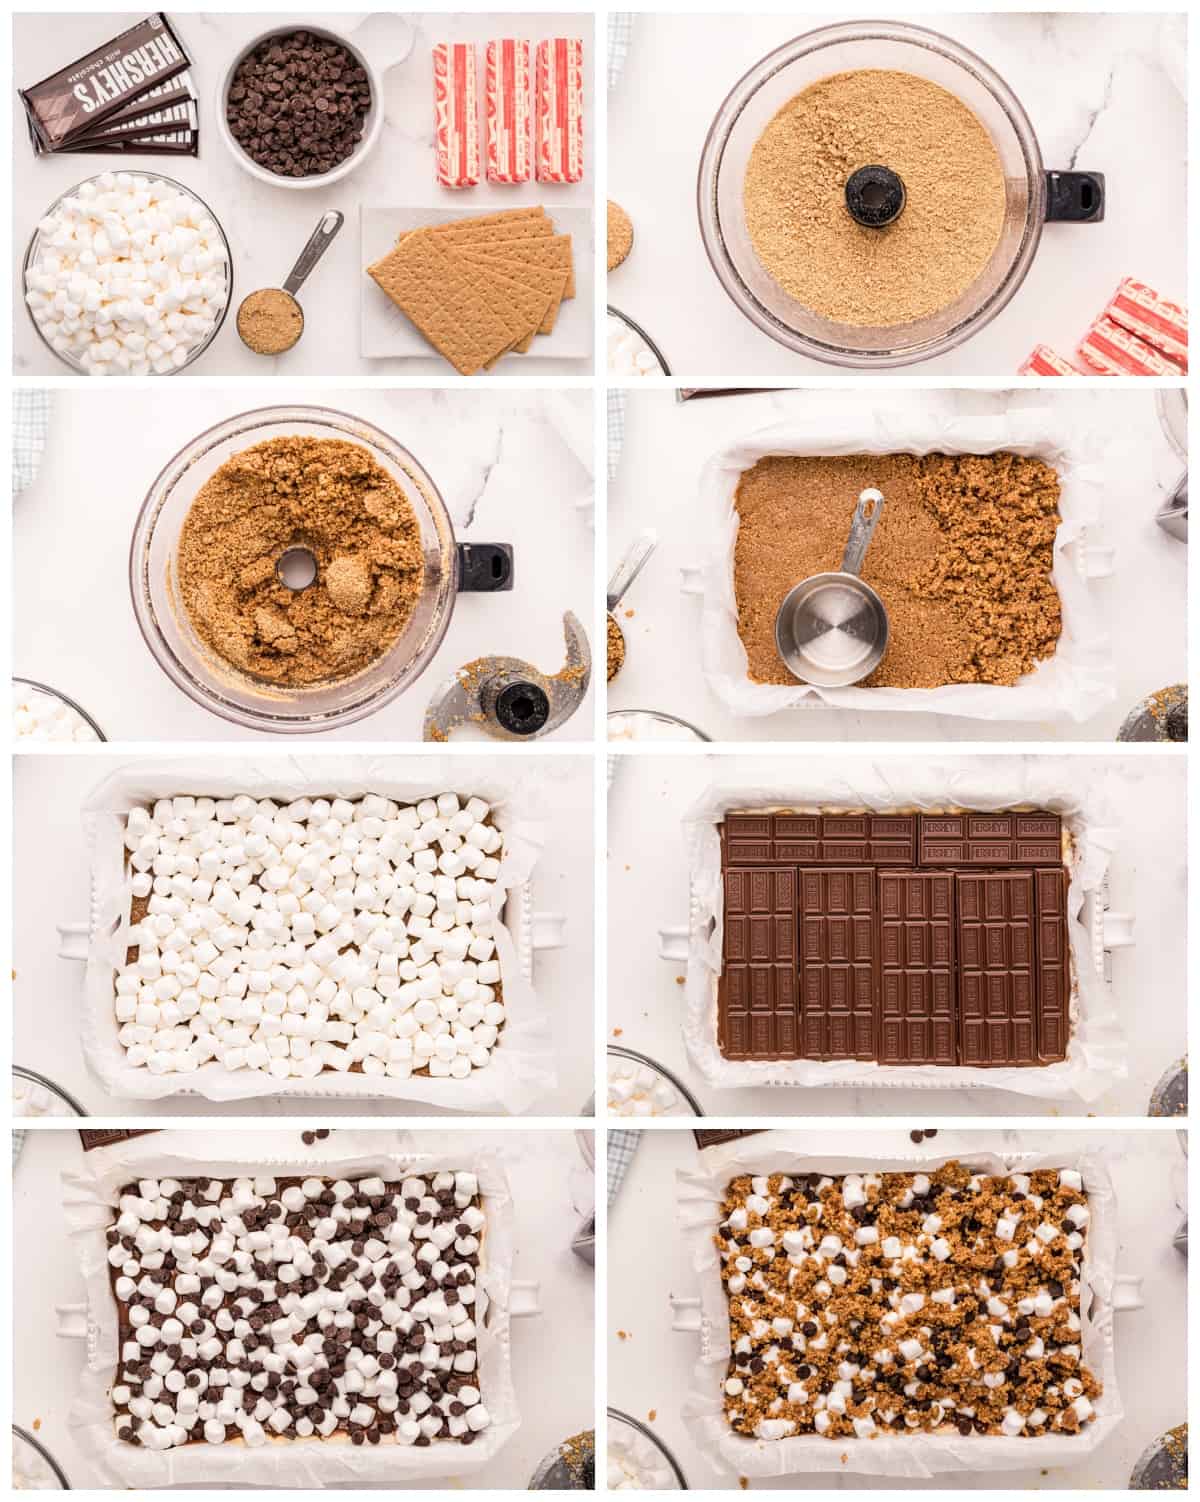 how to make s'mores bars step by step photos